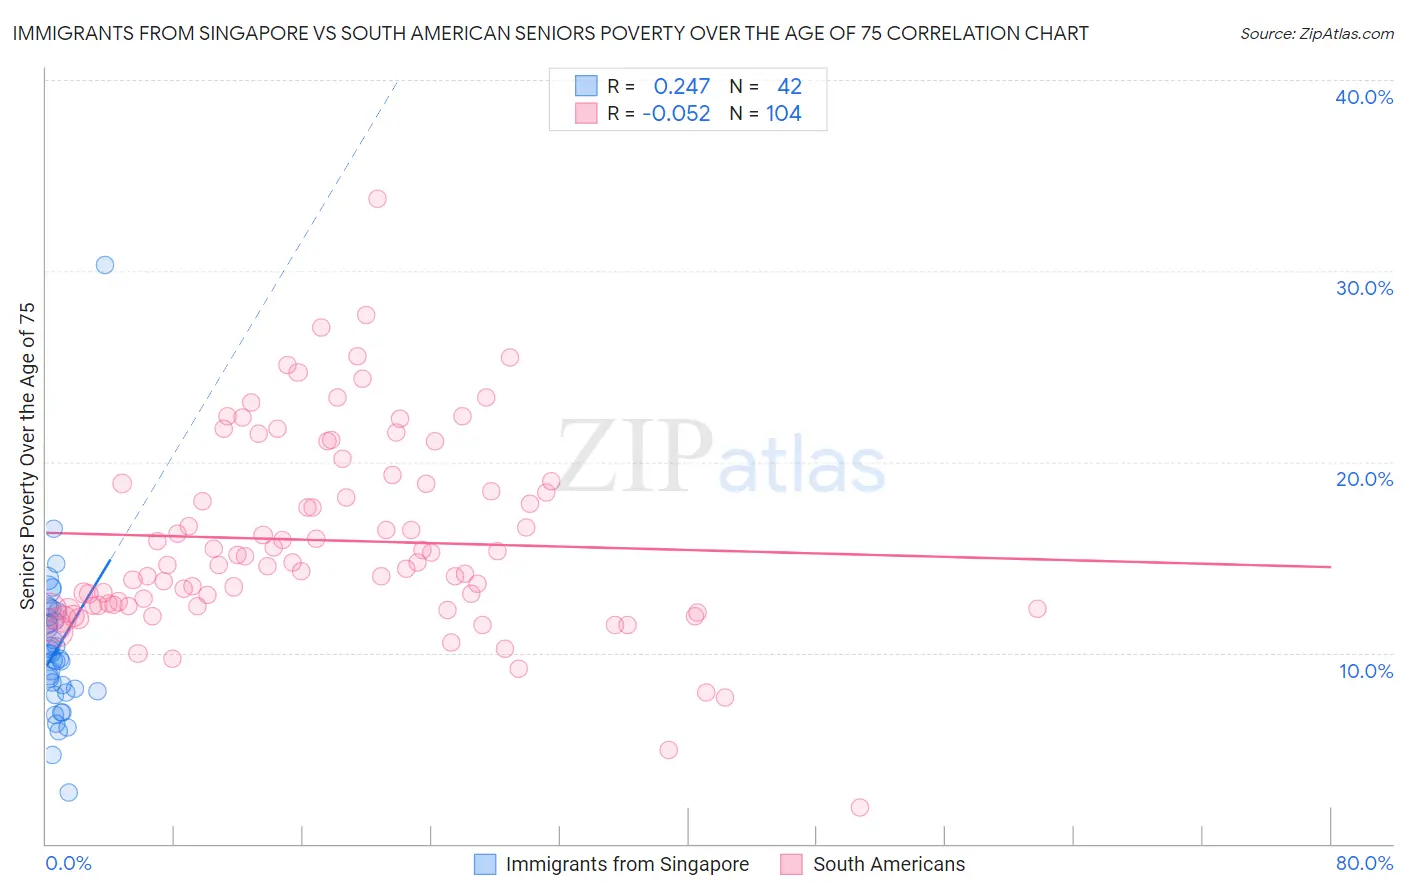 Immigrants from Singapore vs South American Seniors Poverty Over the Age of 75